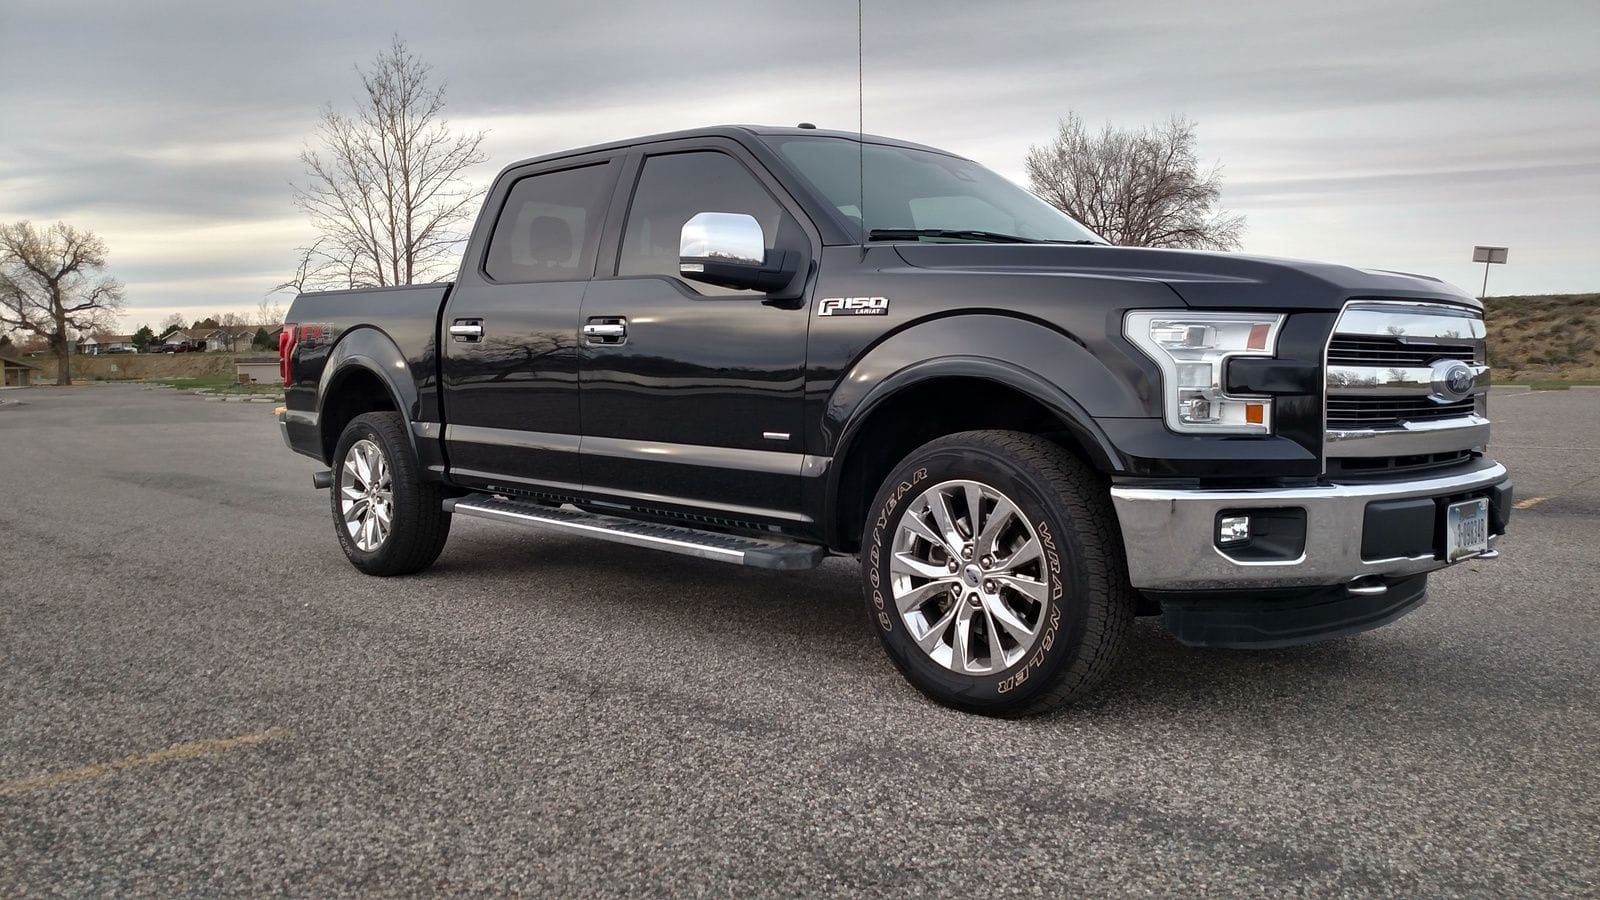 For Sale: 2015 F150 Lariat Supercrew Ford F150 Forum